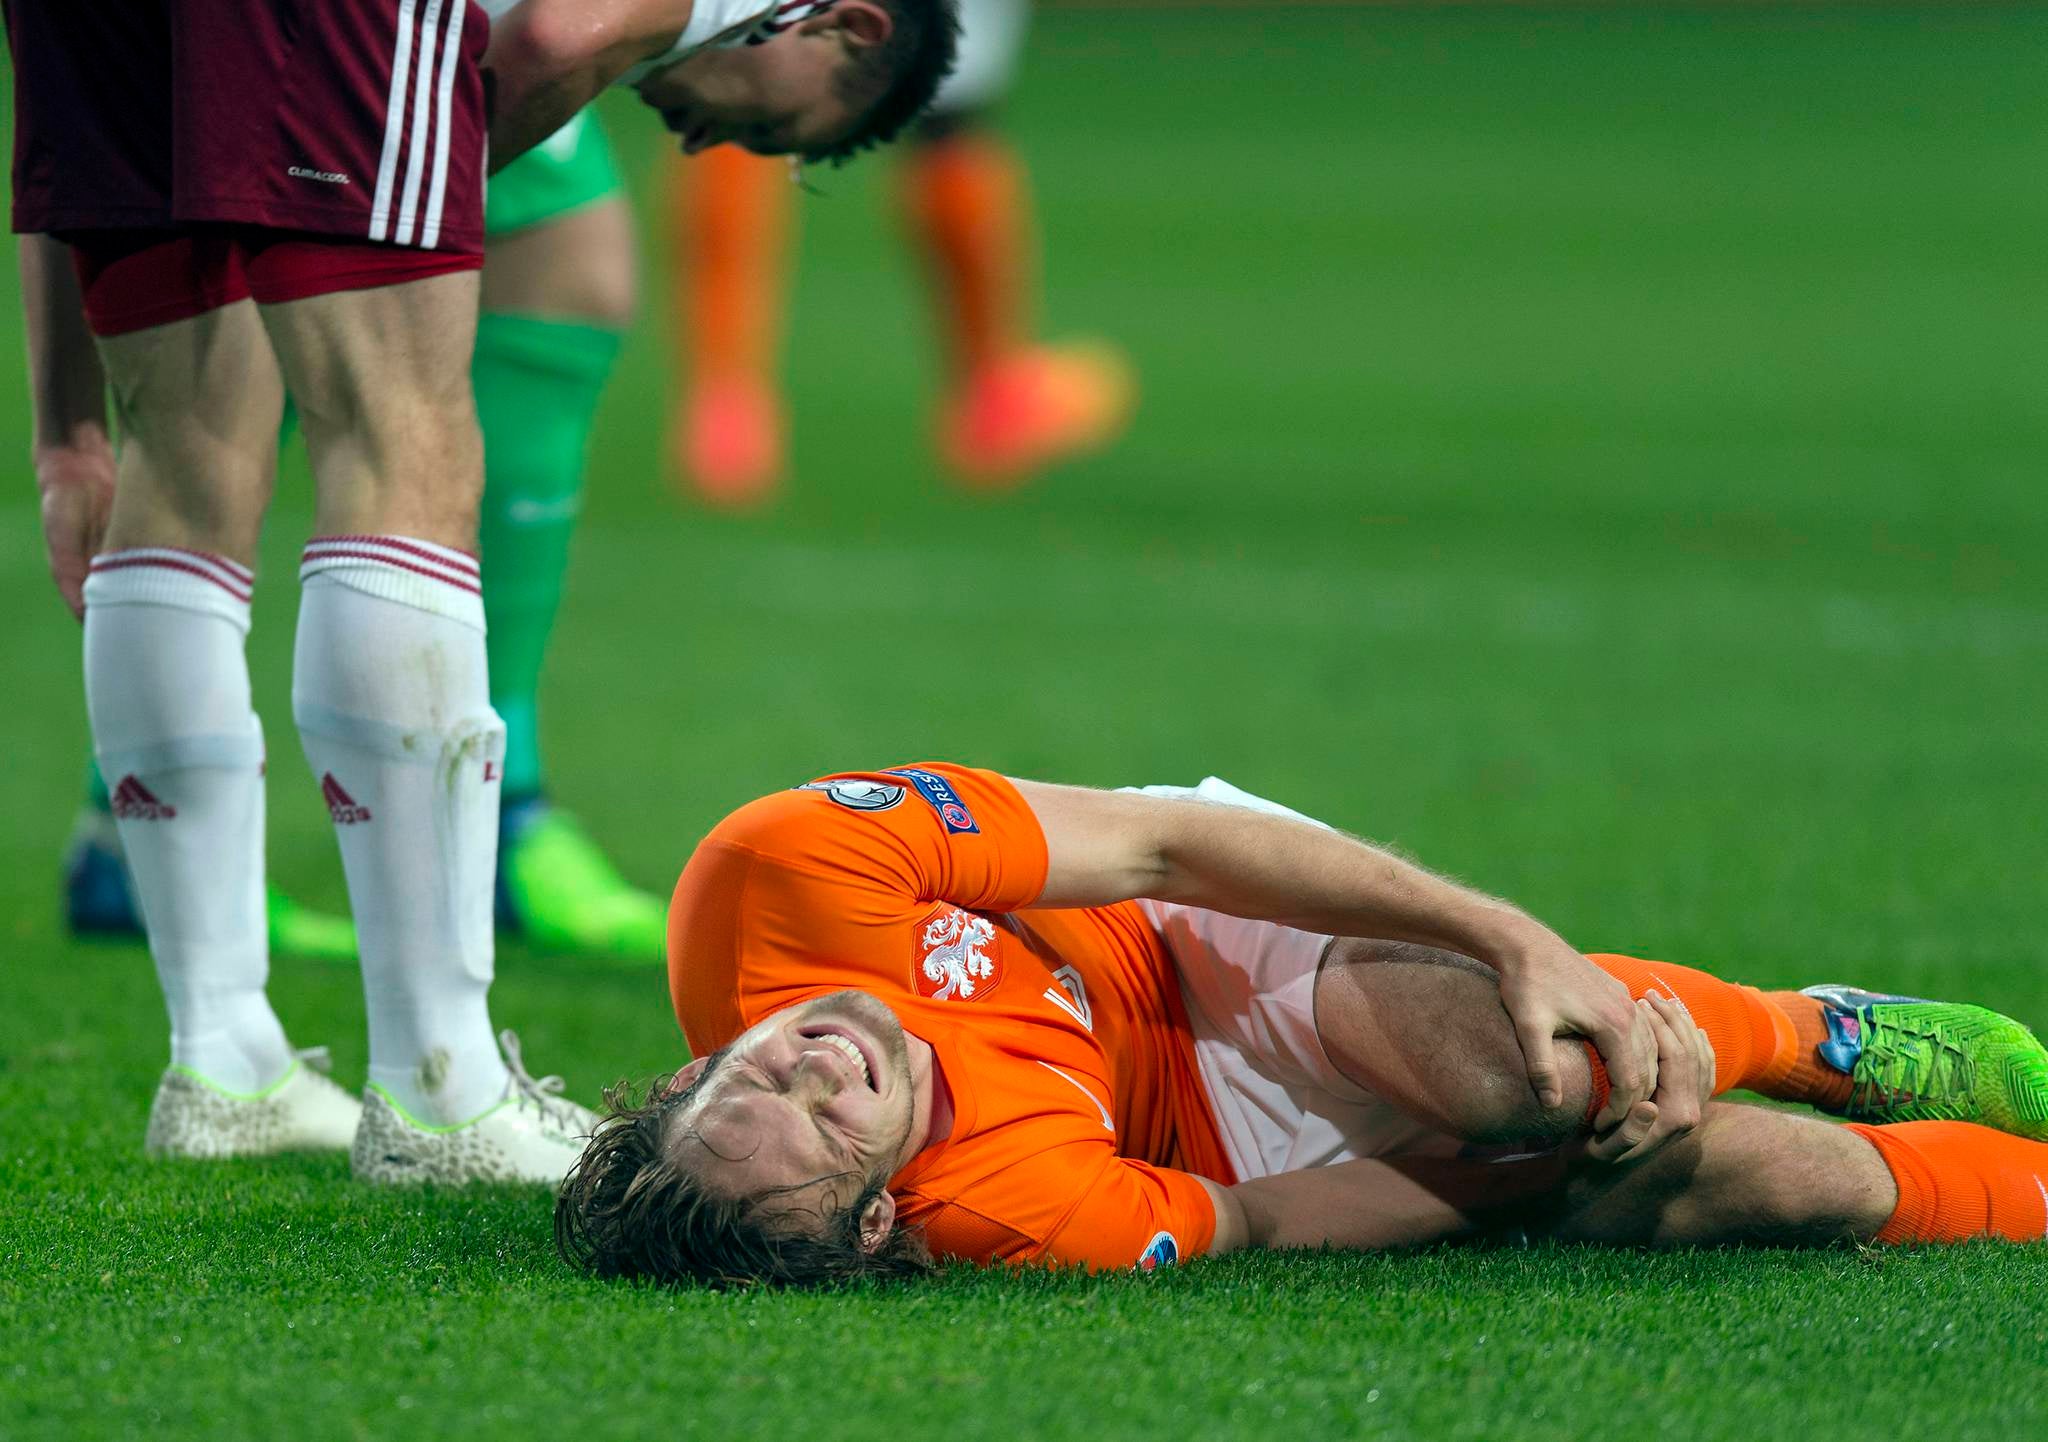 Daley Blind of the Netherlands lies injured after a challenge with Latvia’s Eduards Viskanovs in Amsterdam